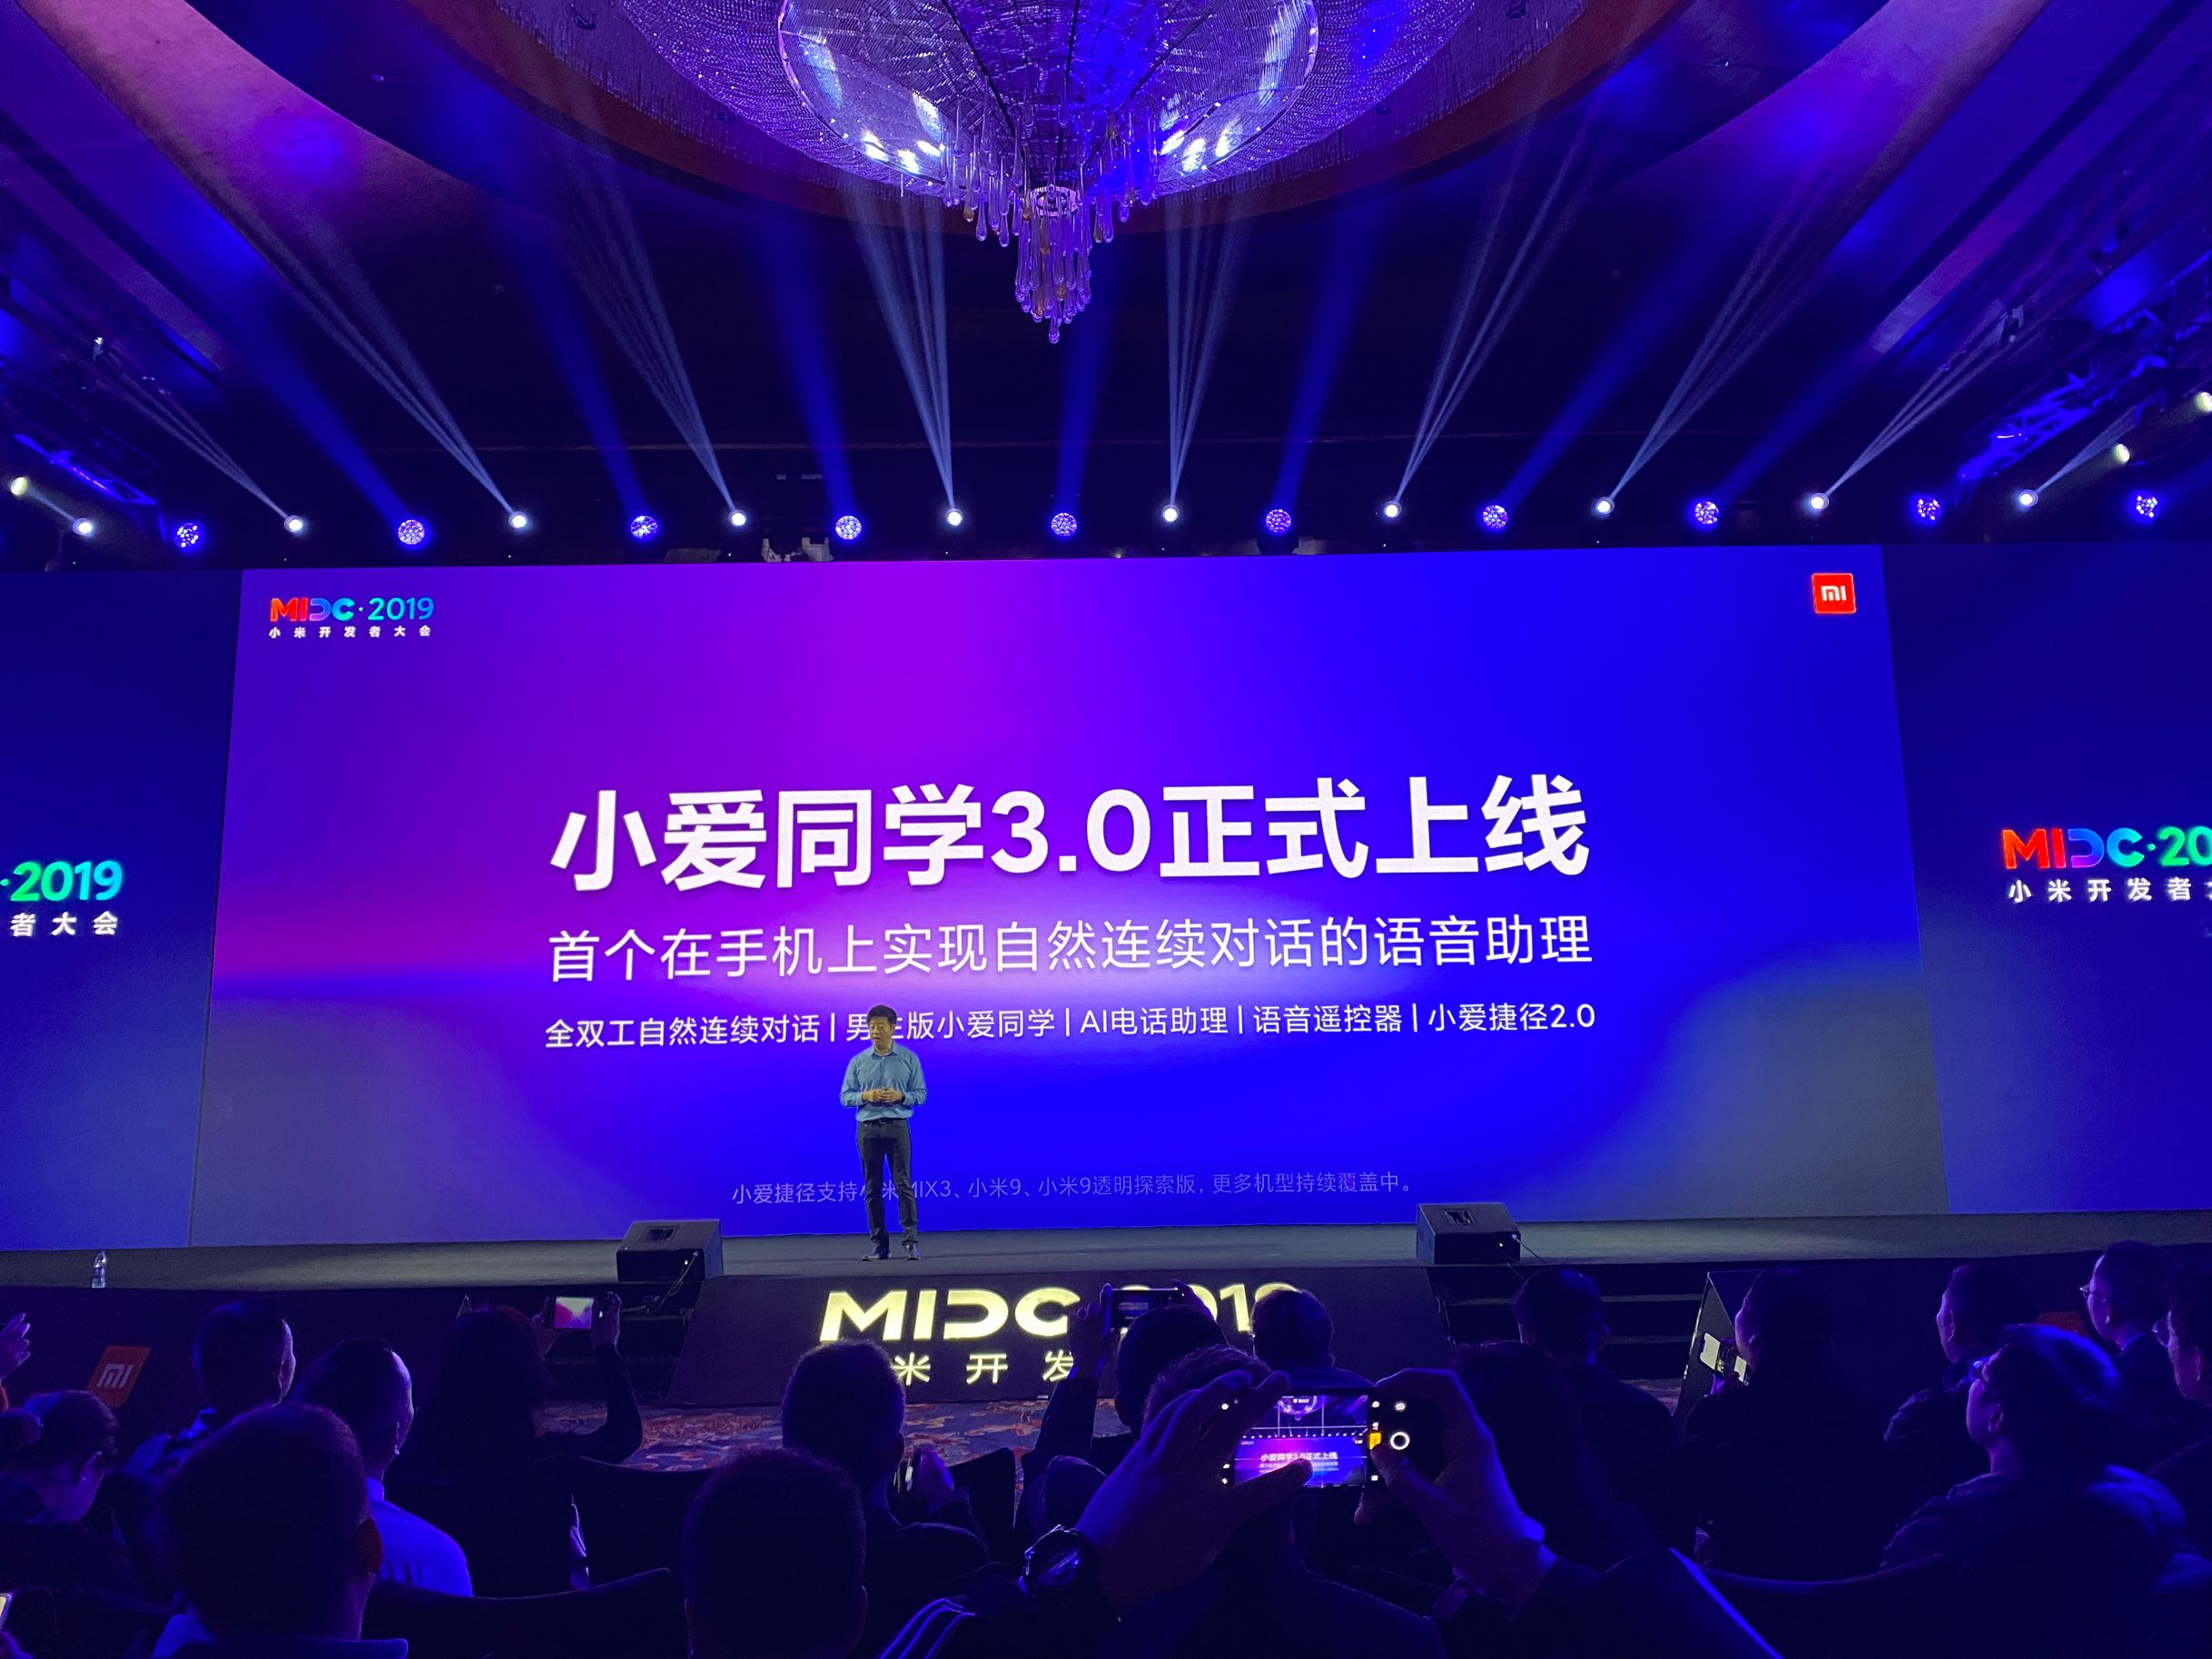 XiaoAI Smart Assistant